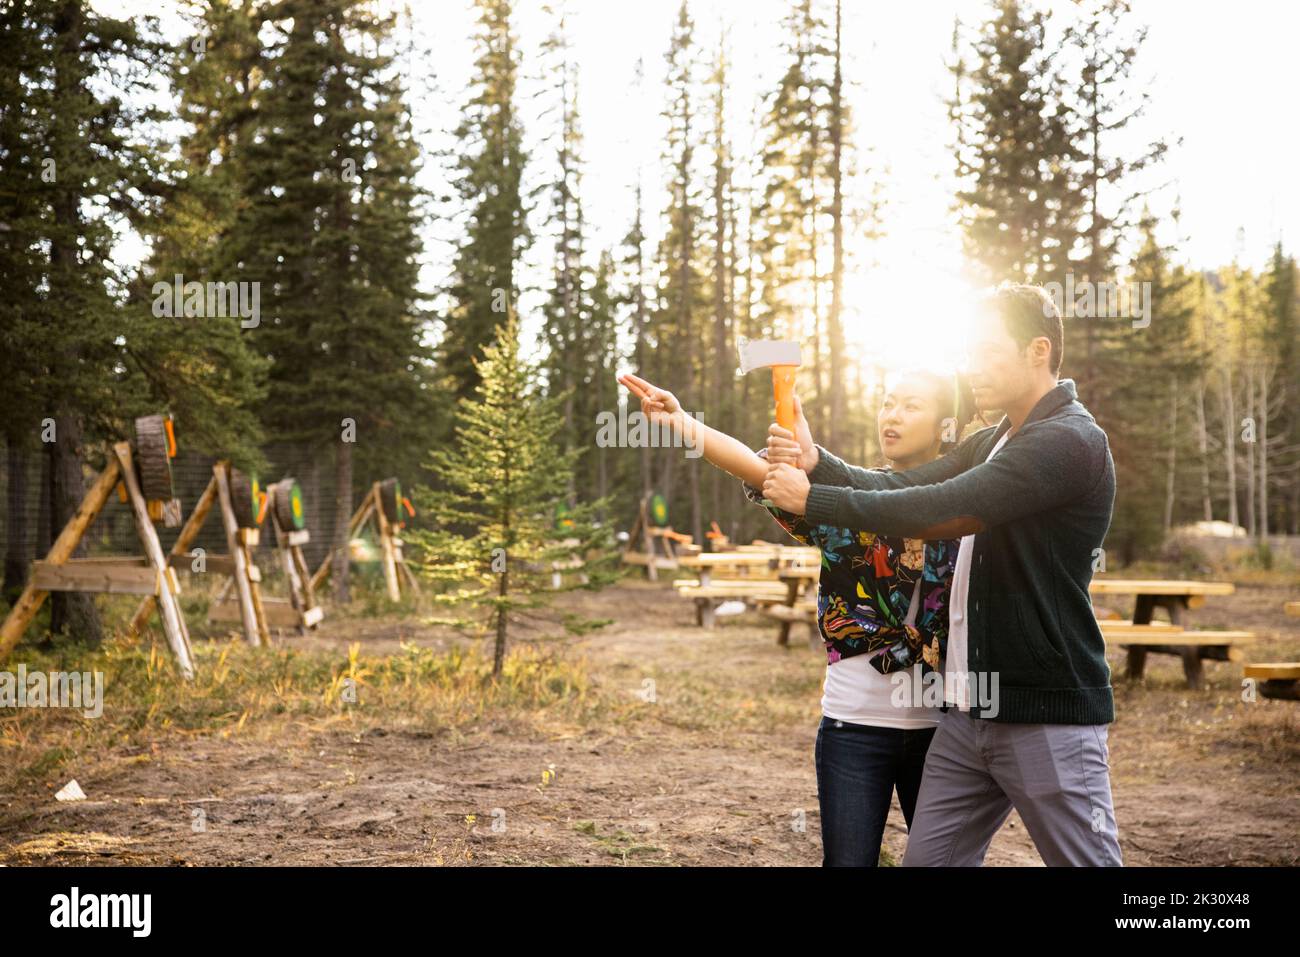 Woman showing man how to throw axe at target in forest Stock Photo